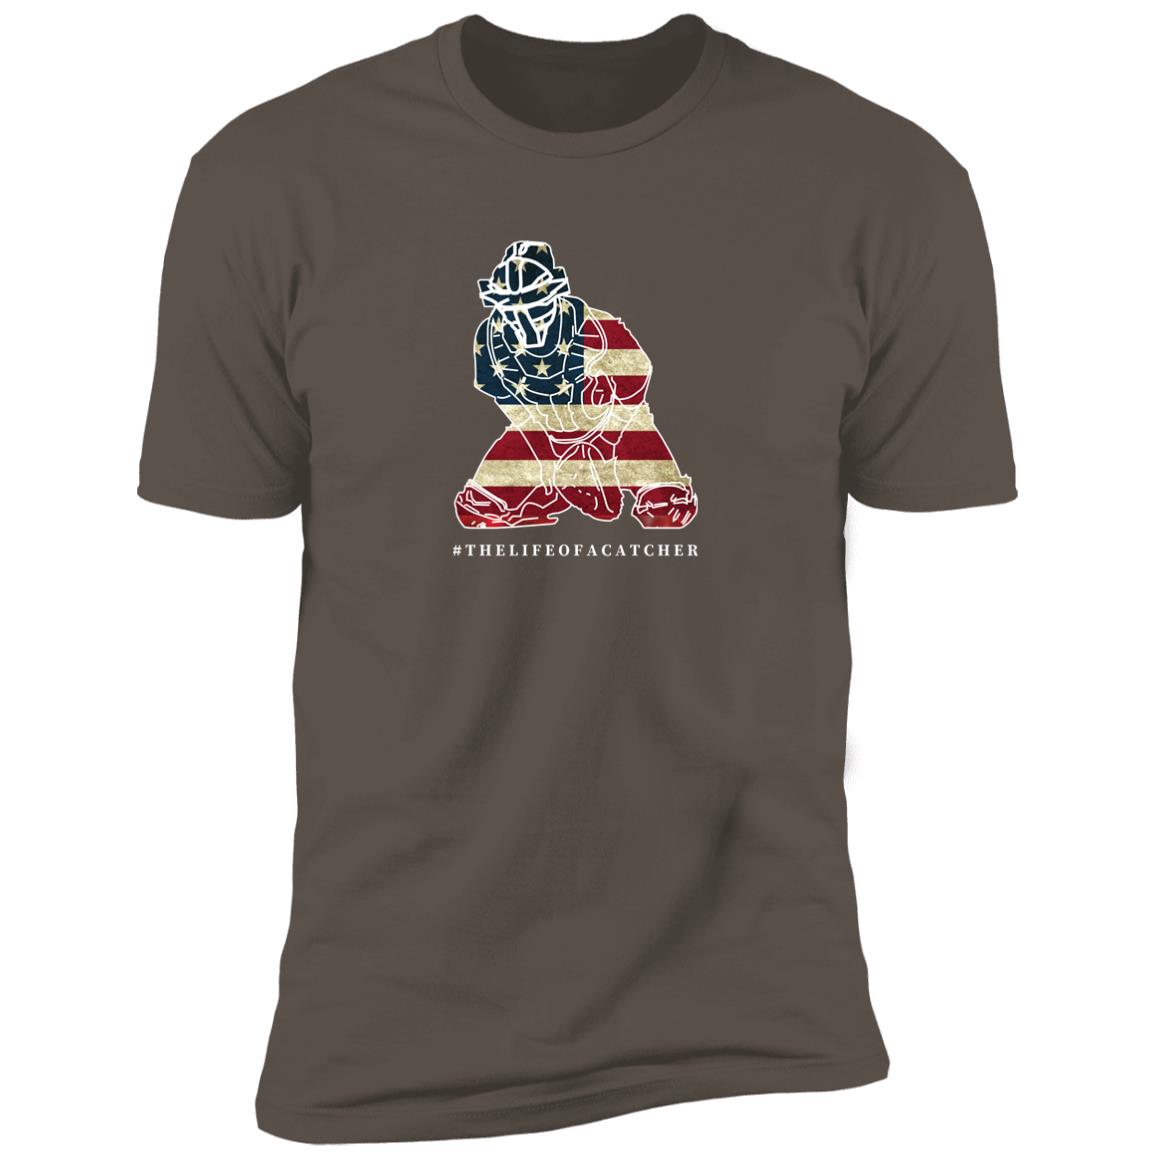 The-Catching-Guy-Flag-grey-tee-catcher